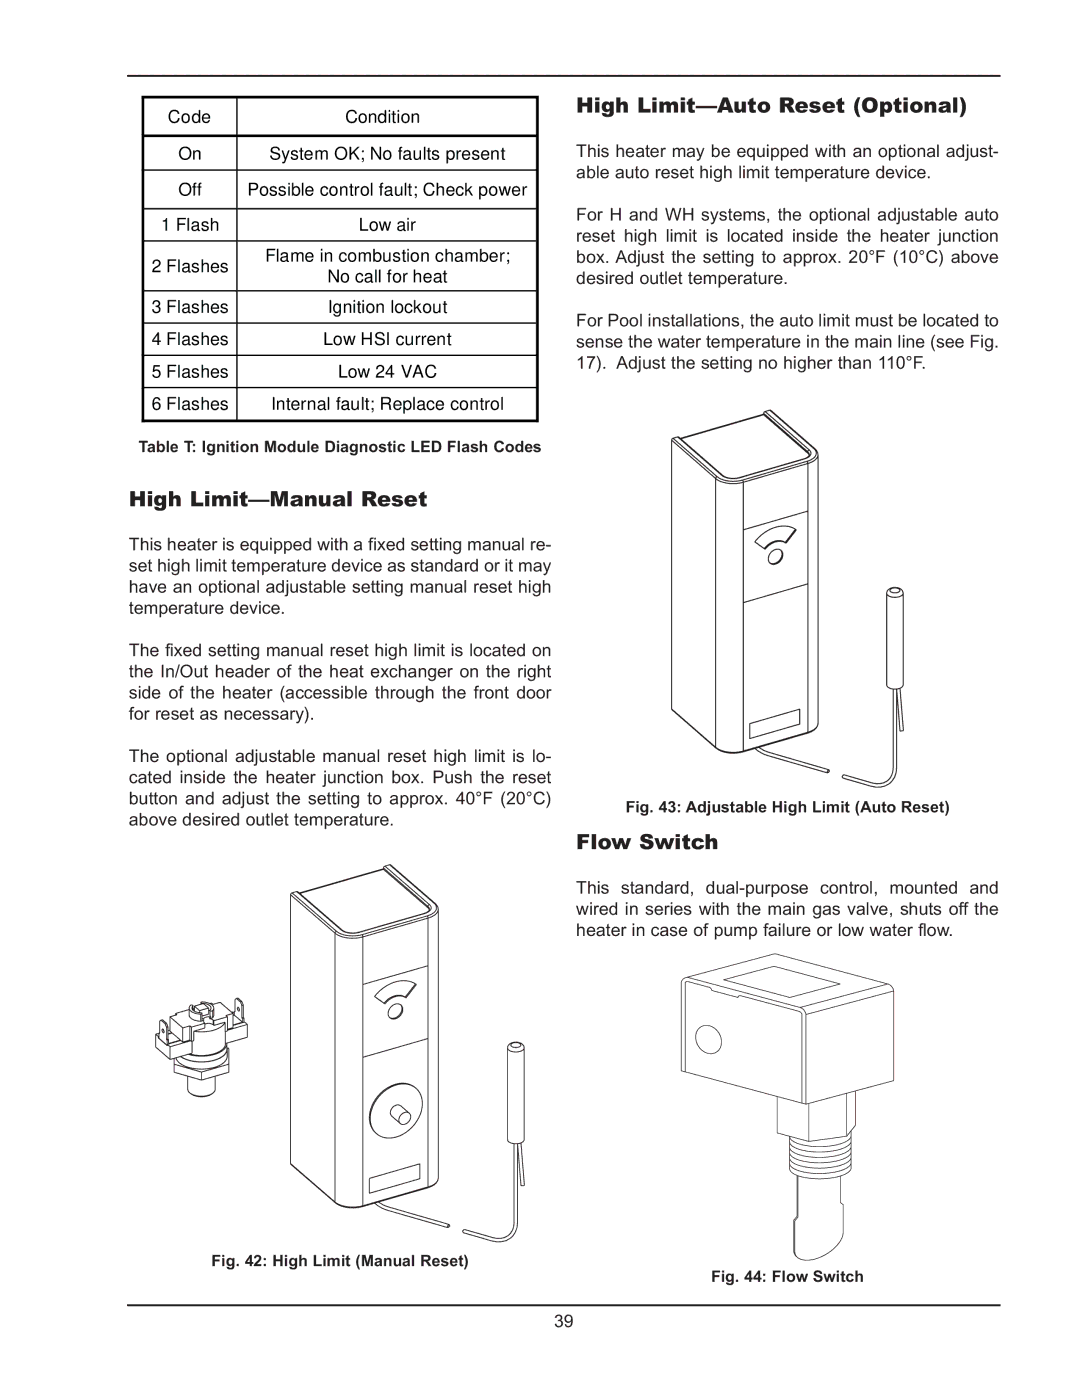 Raypak 1005 operating instructions High Limit-Manual Reset, High Limit-Auto Reset Optional, Flow Switch, Code Condition 